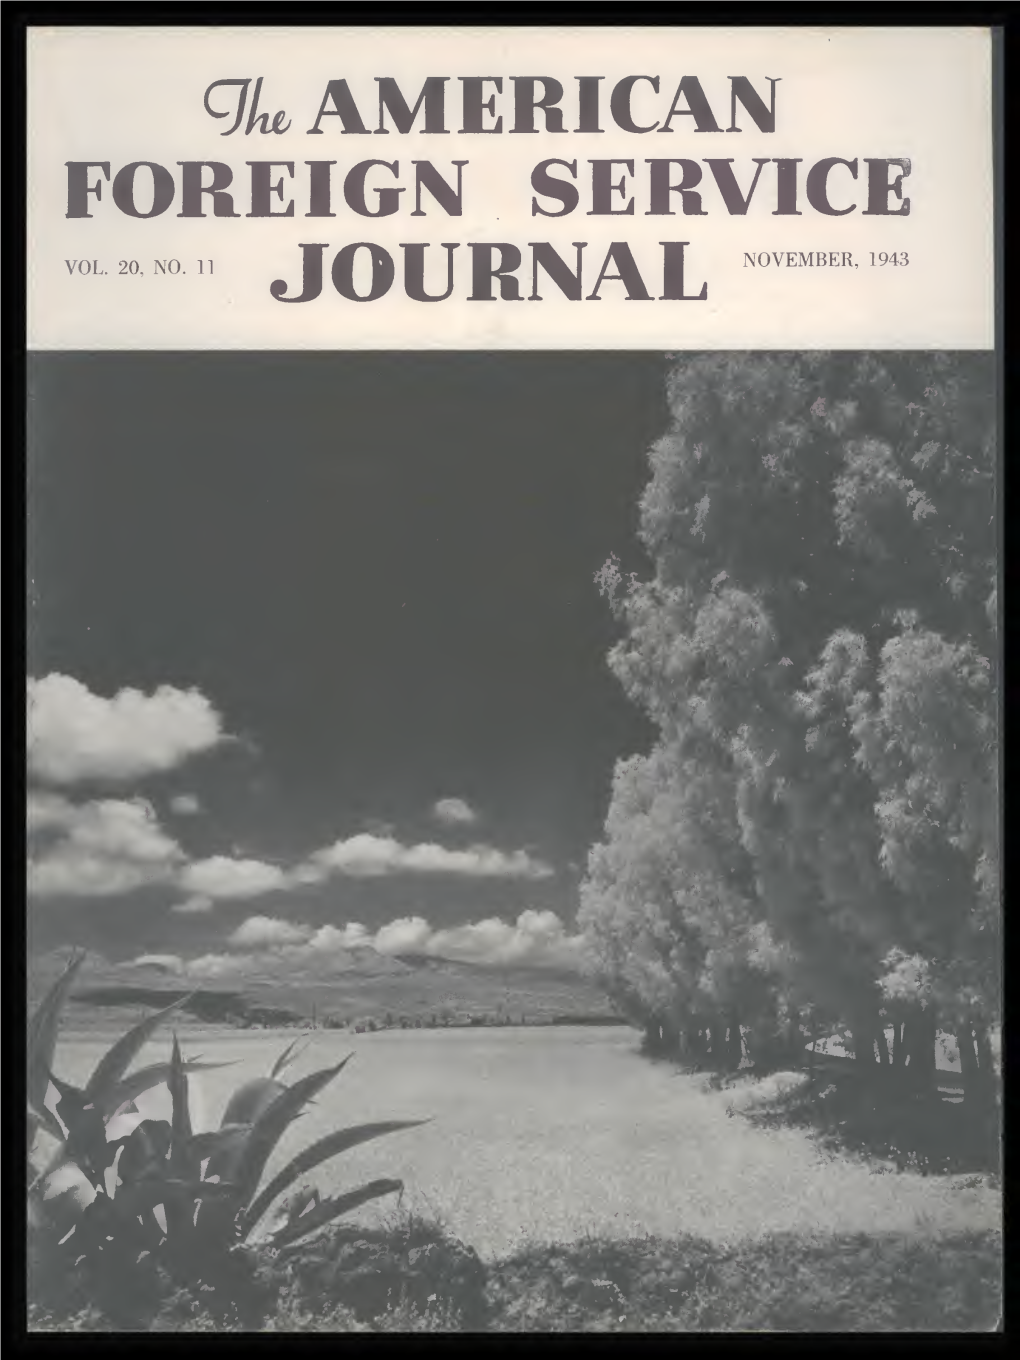 The Foreign Service Journal, November 1943